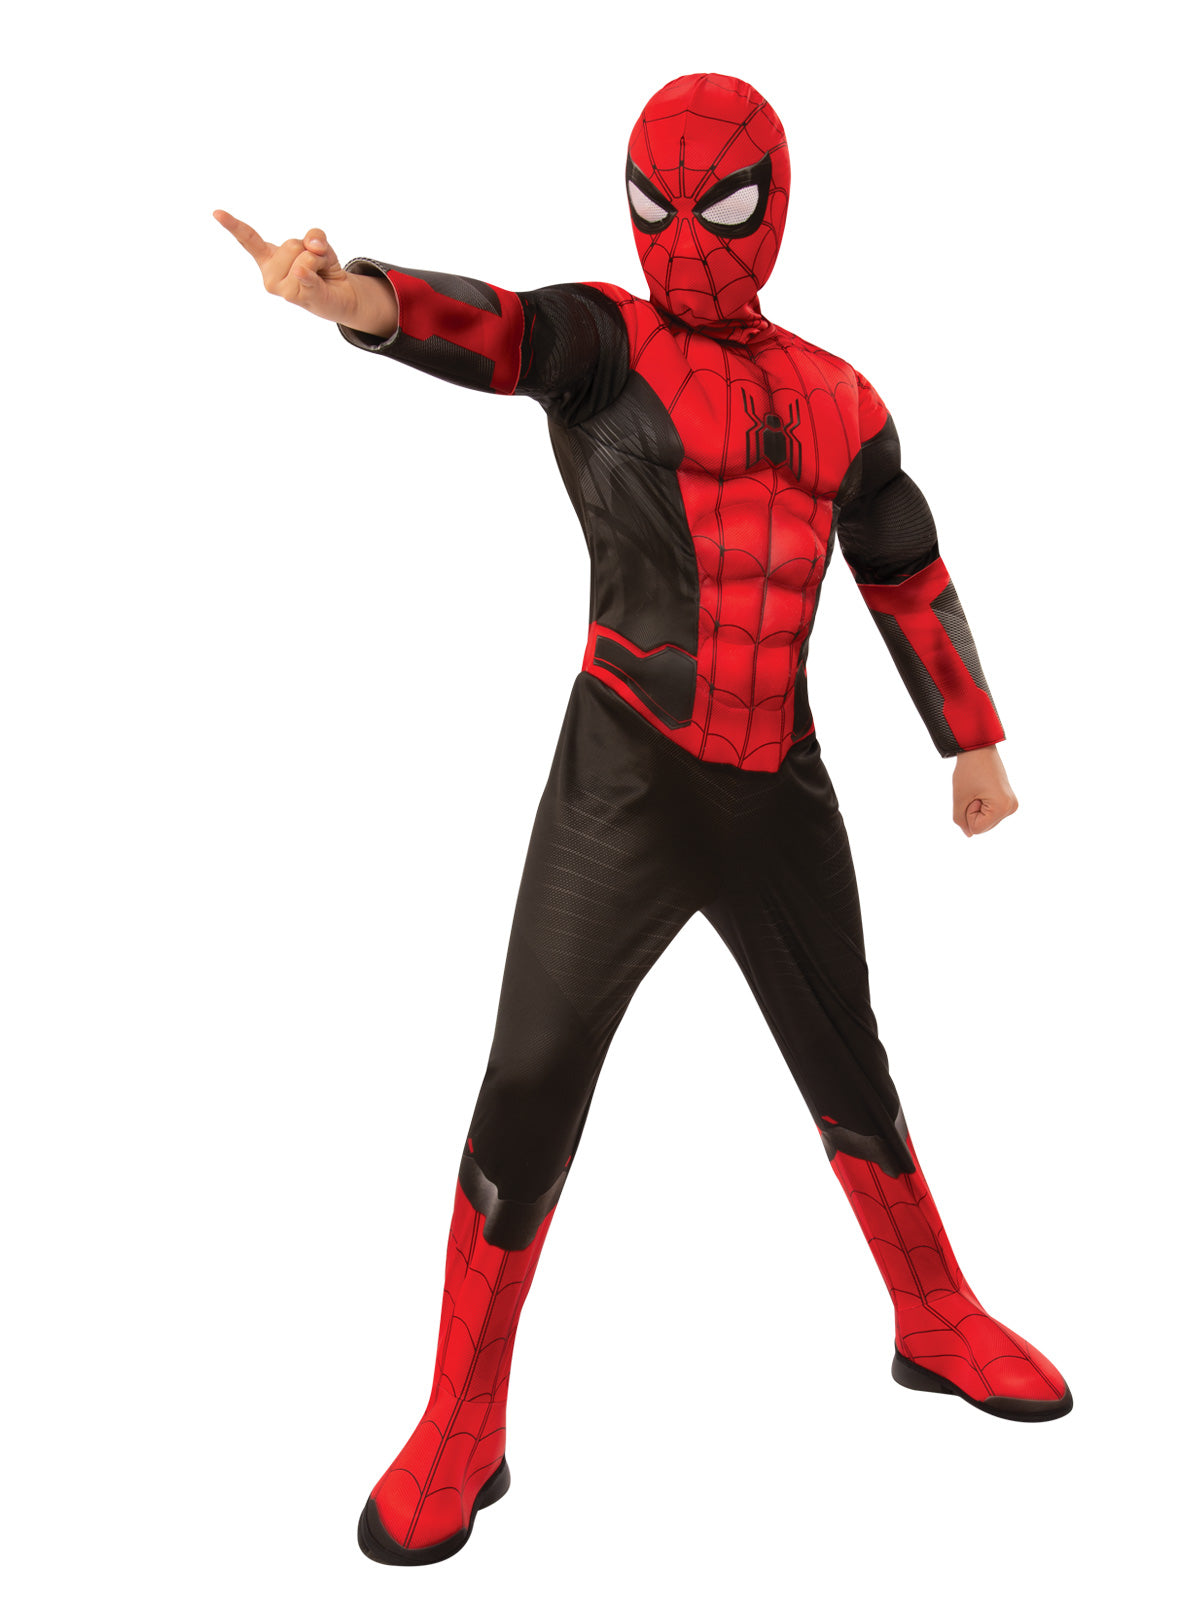 Spiderman No Way Home Deluxe Red and Black Boys Child Costume Marvel Licensed